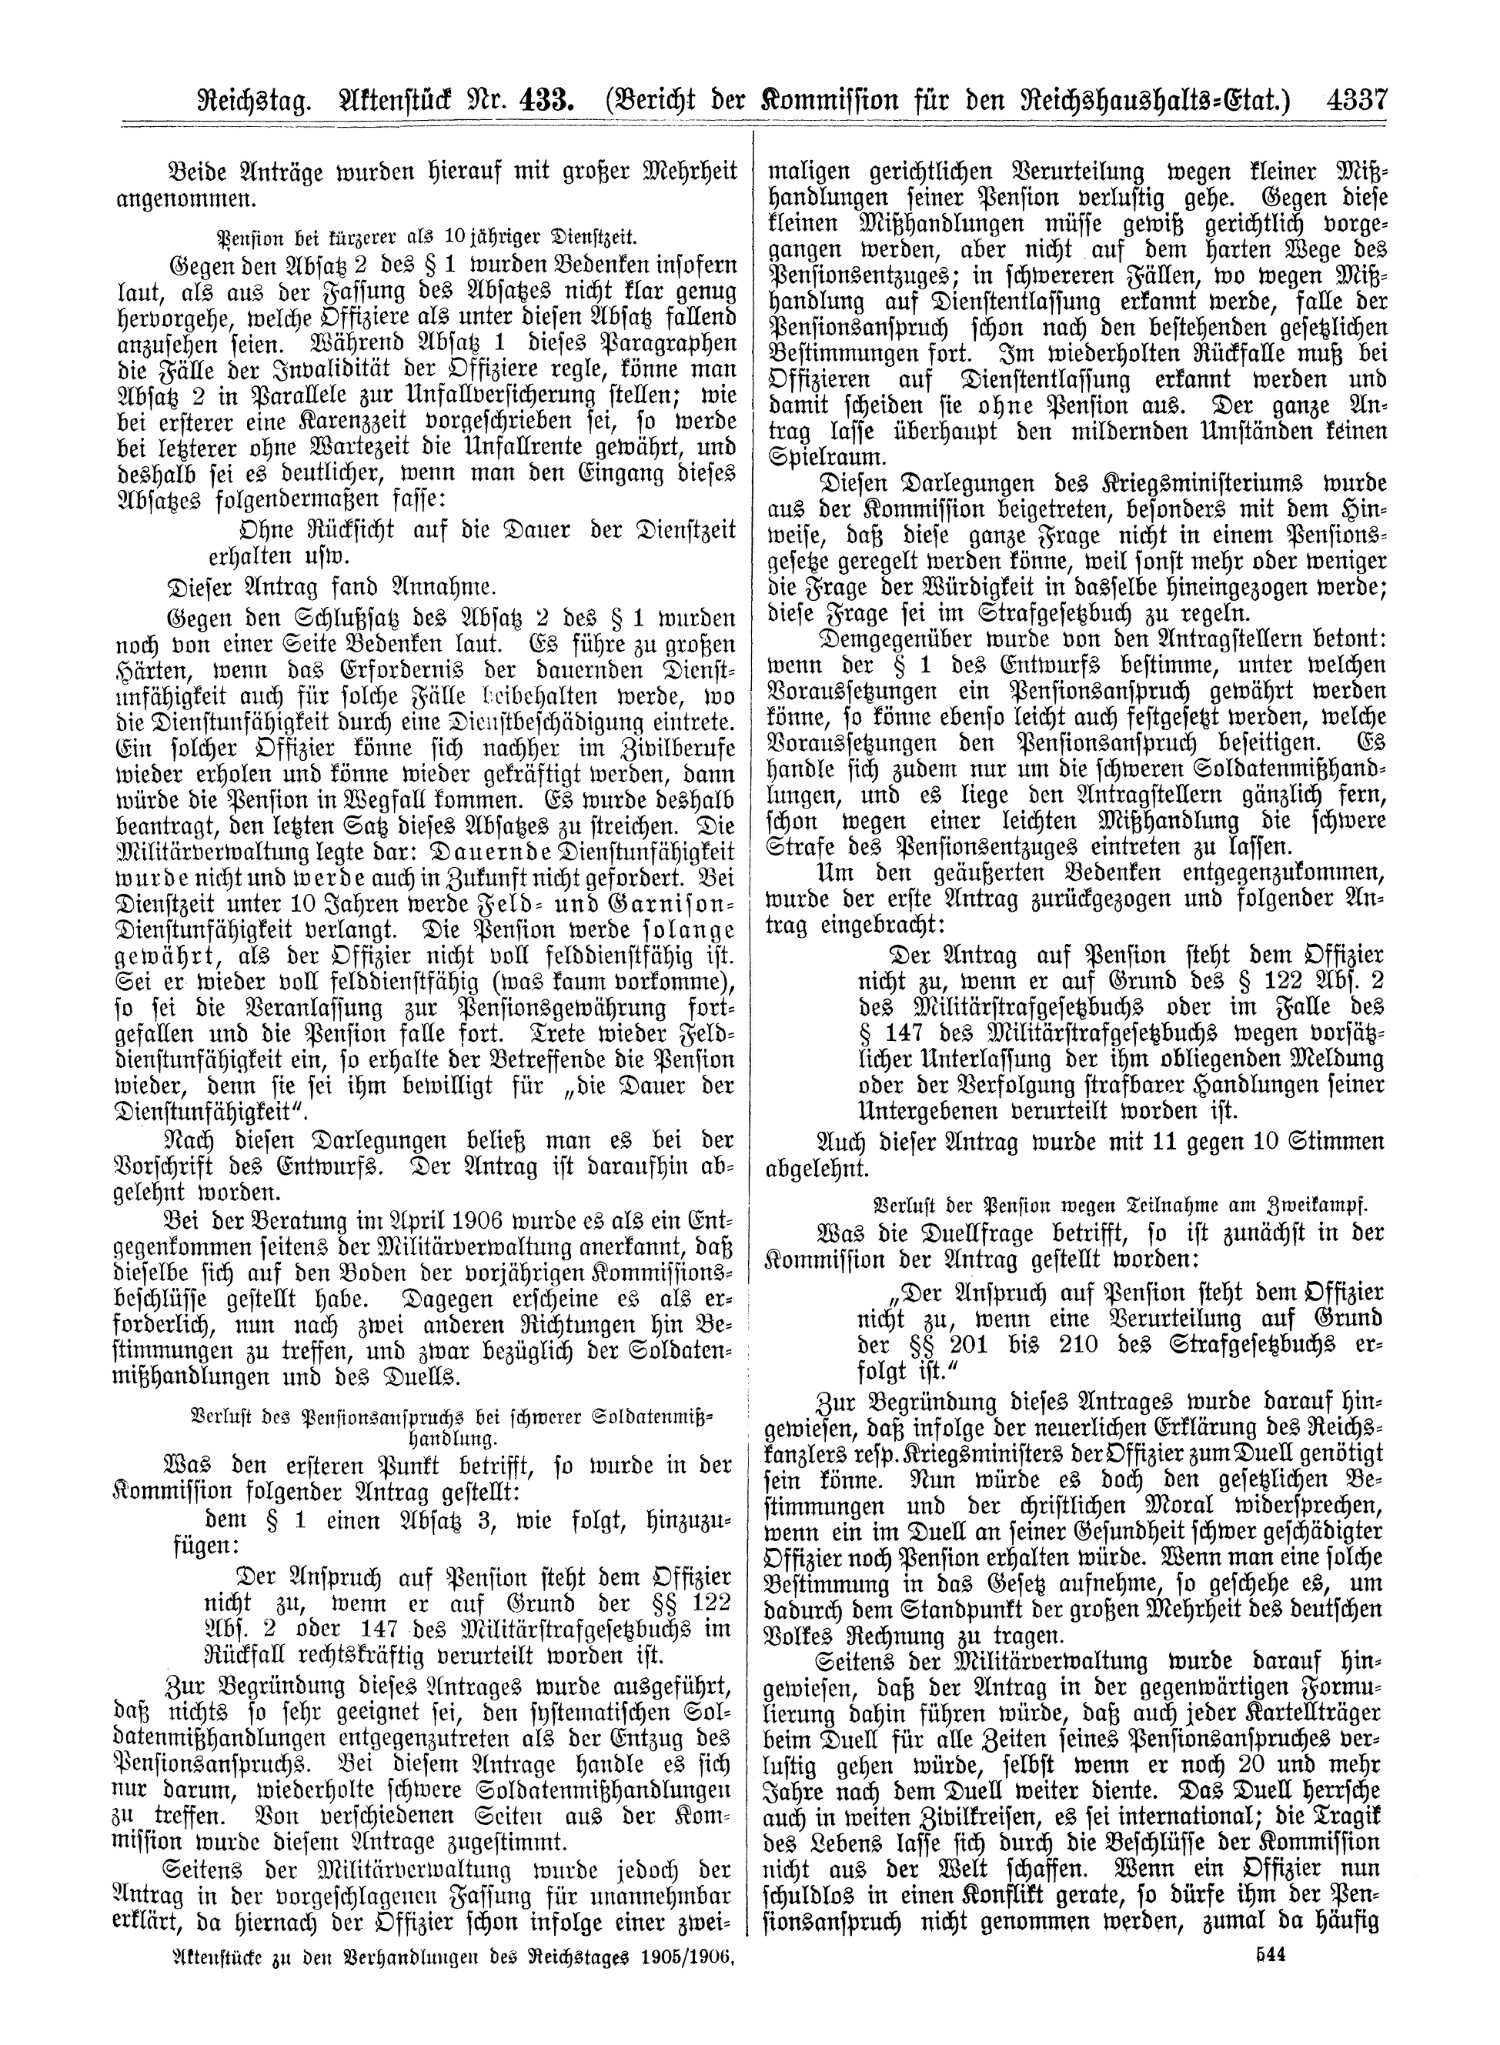 Scan of page 4337